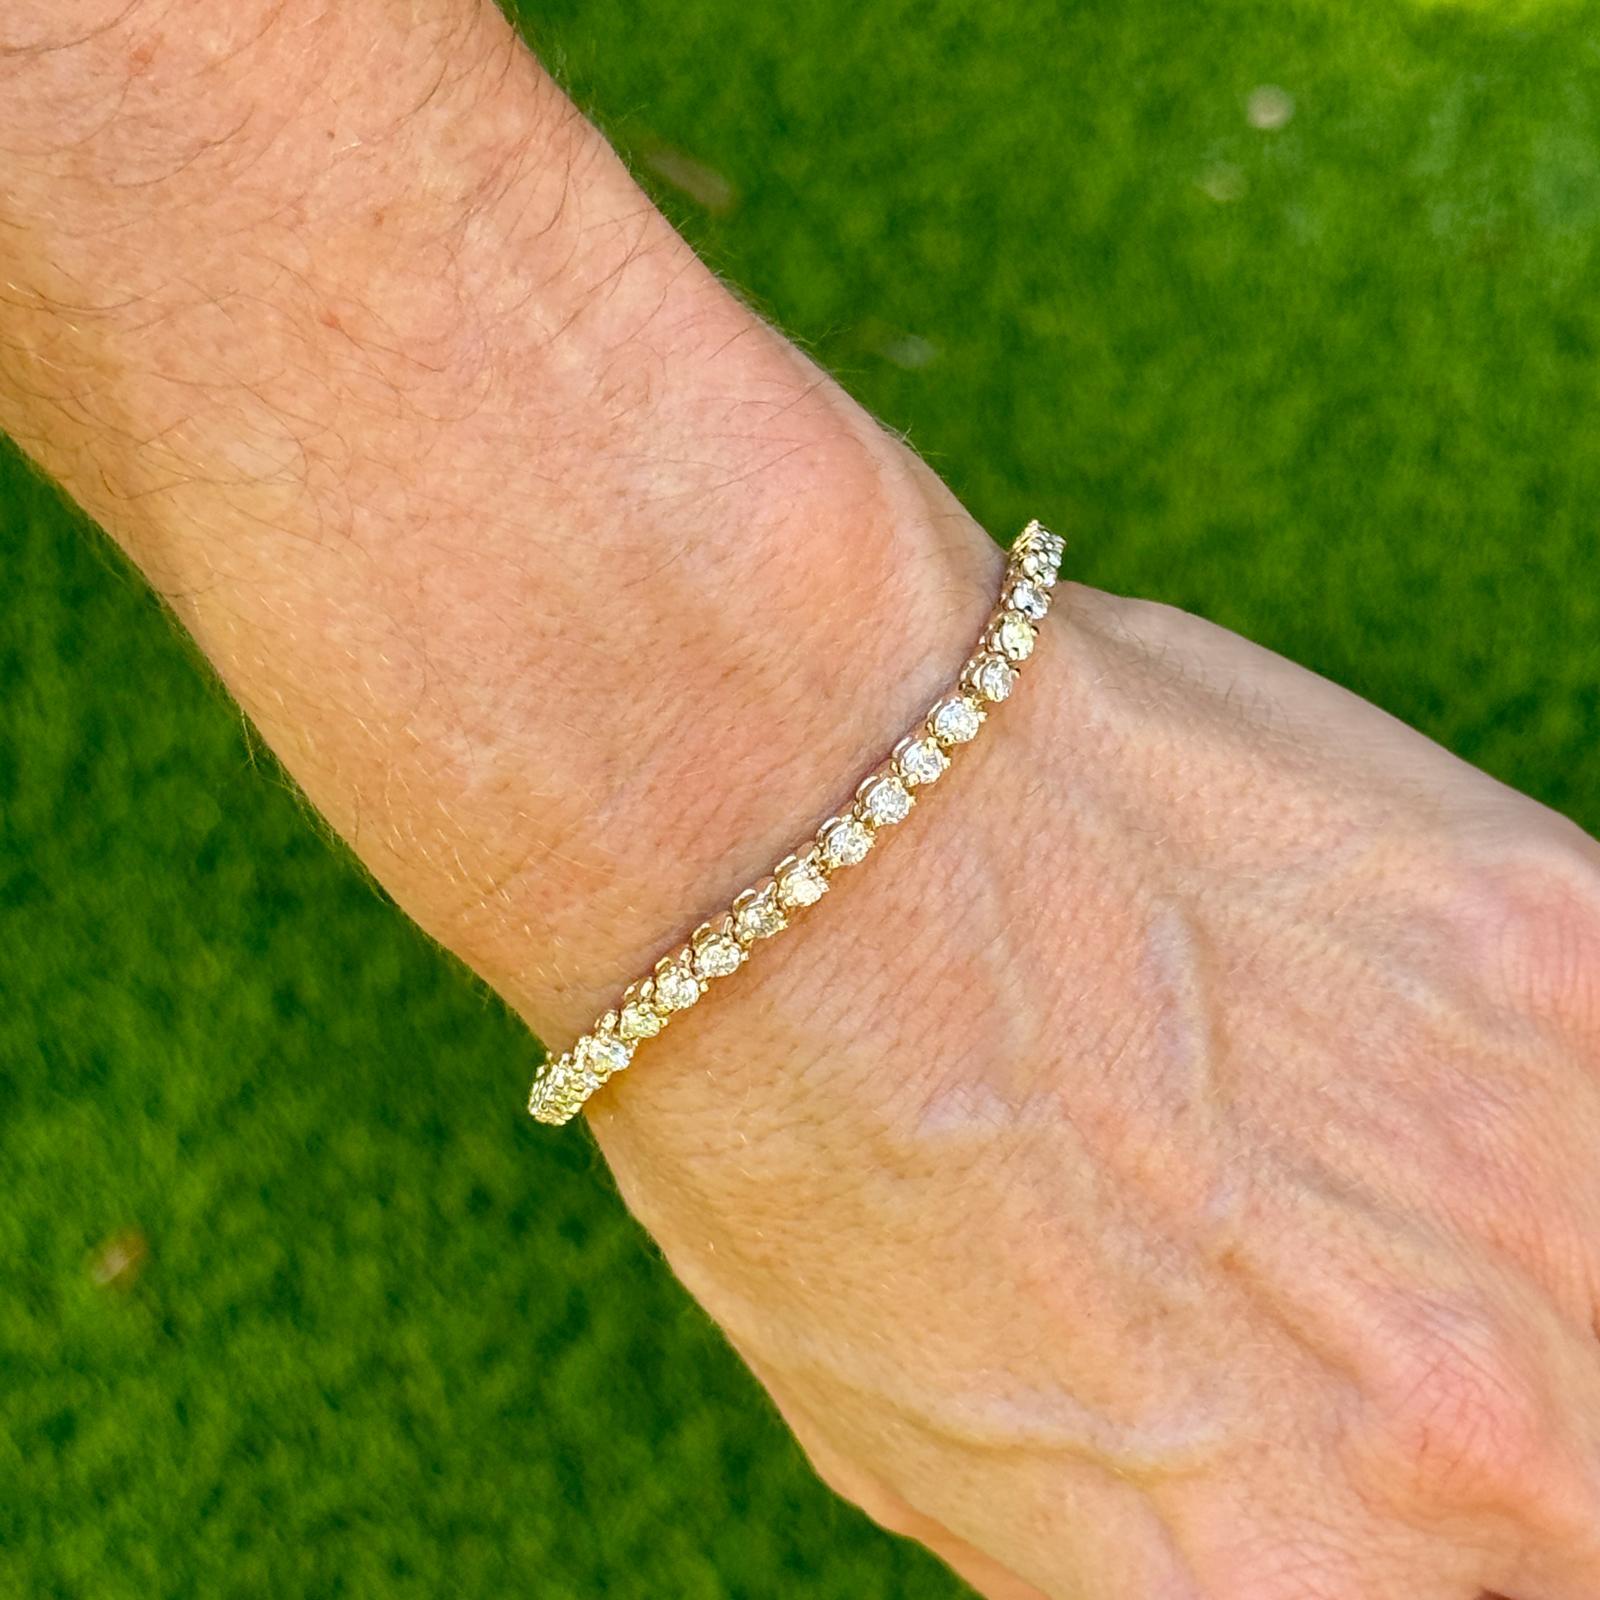 Diamond tennis bracelet crafted in 14 karat yellow gold. The bracelet features 44 round brilliant cut diamonds weighing approximately 4.30 CTW and grade I color and SI2-I1 clarity. The bracelet measures 7.0 inches in length and 3.5mm in width. Box